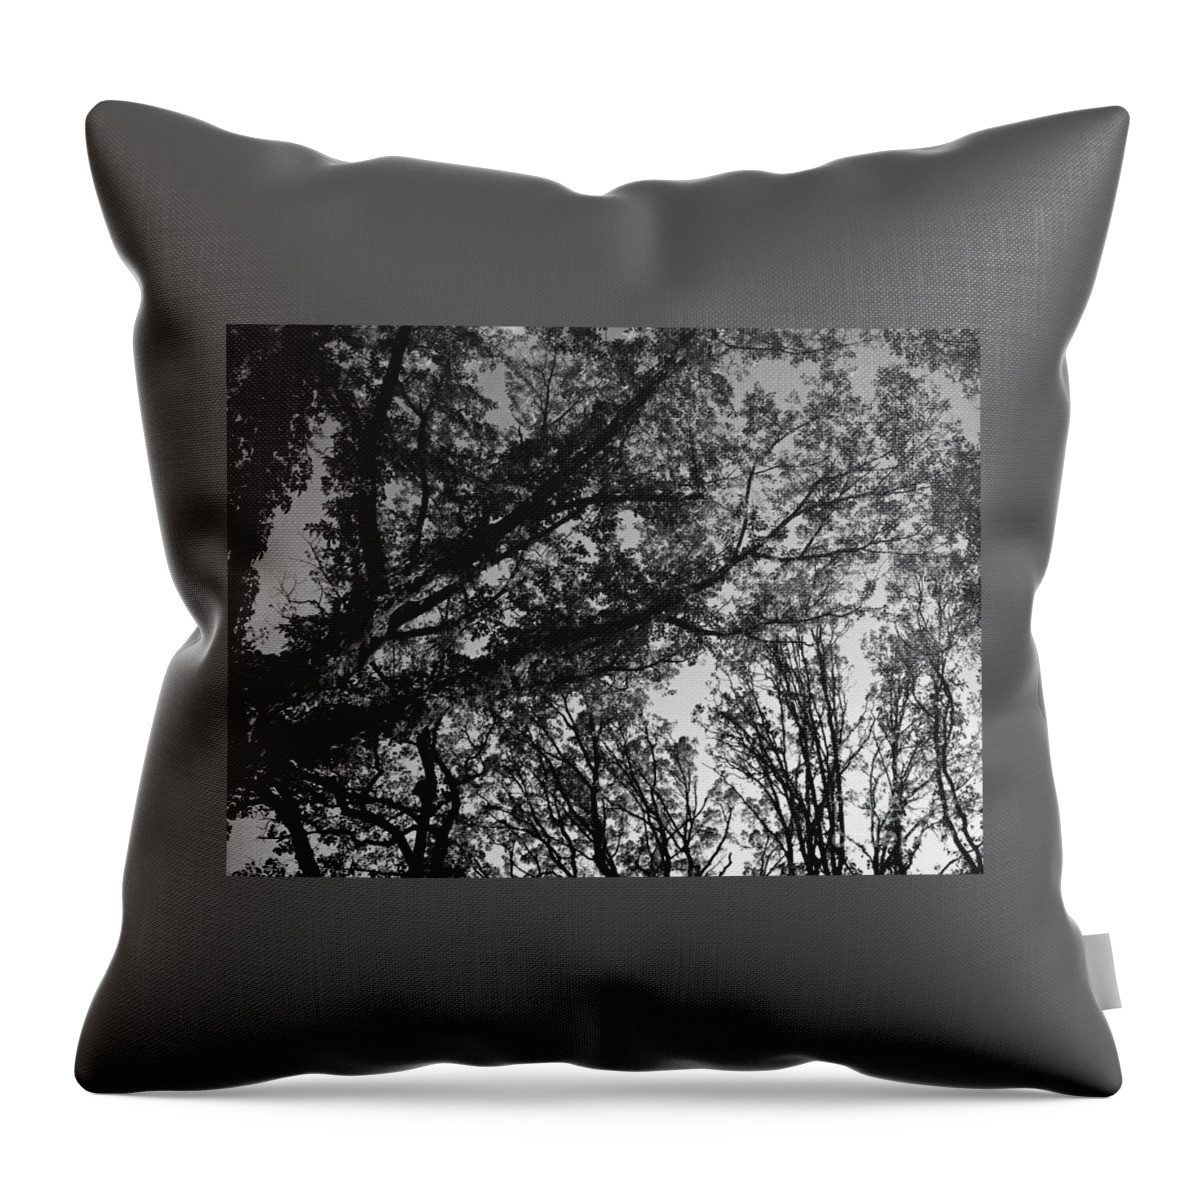 Monochrome Throw Pillow featuring the photograph Abstract Autumn Sunlit Tree Branches - Mono by Frank J Casella